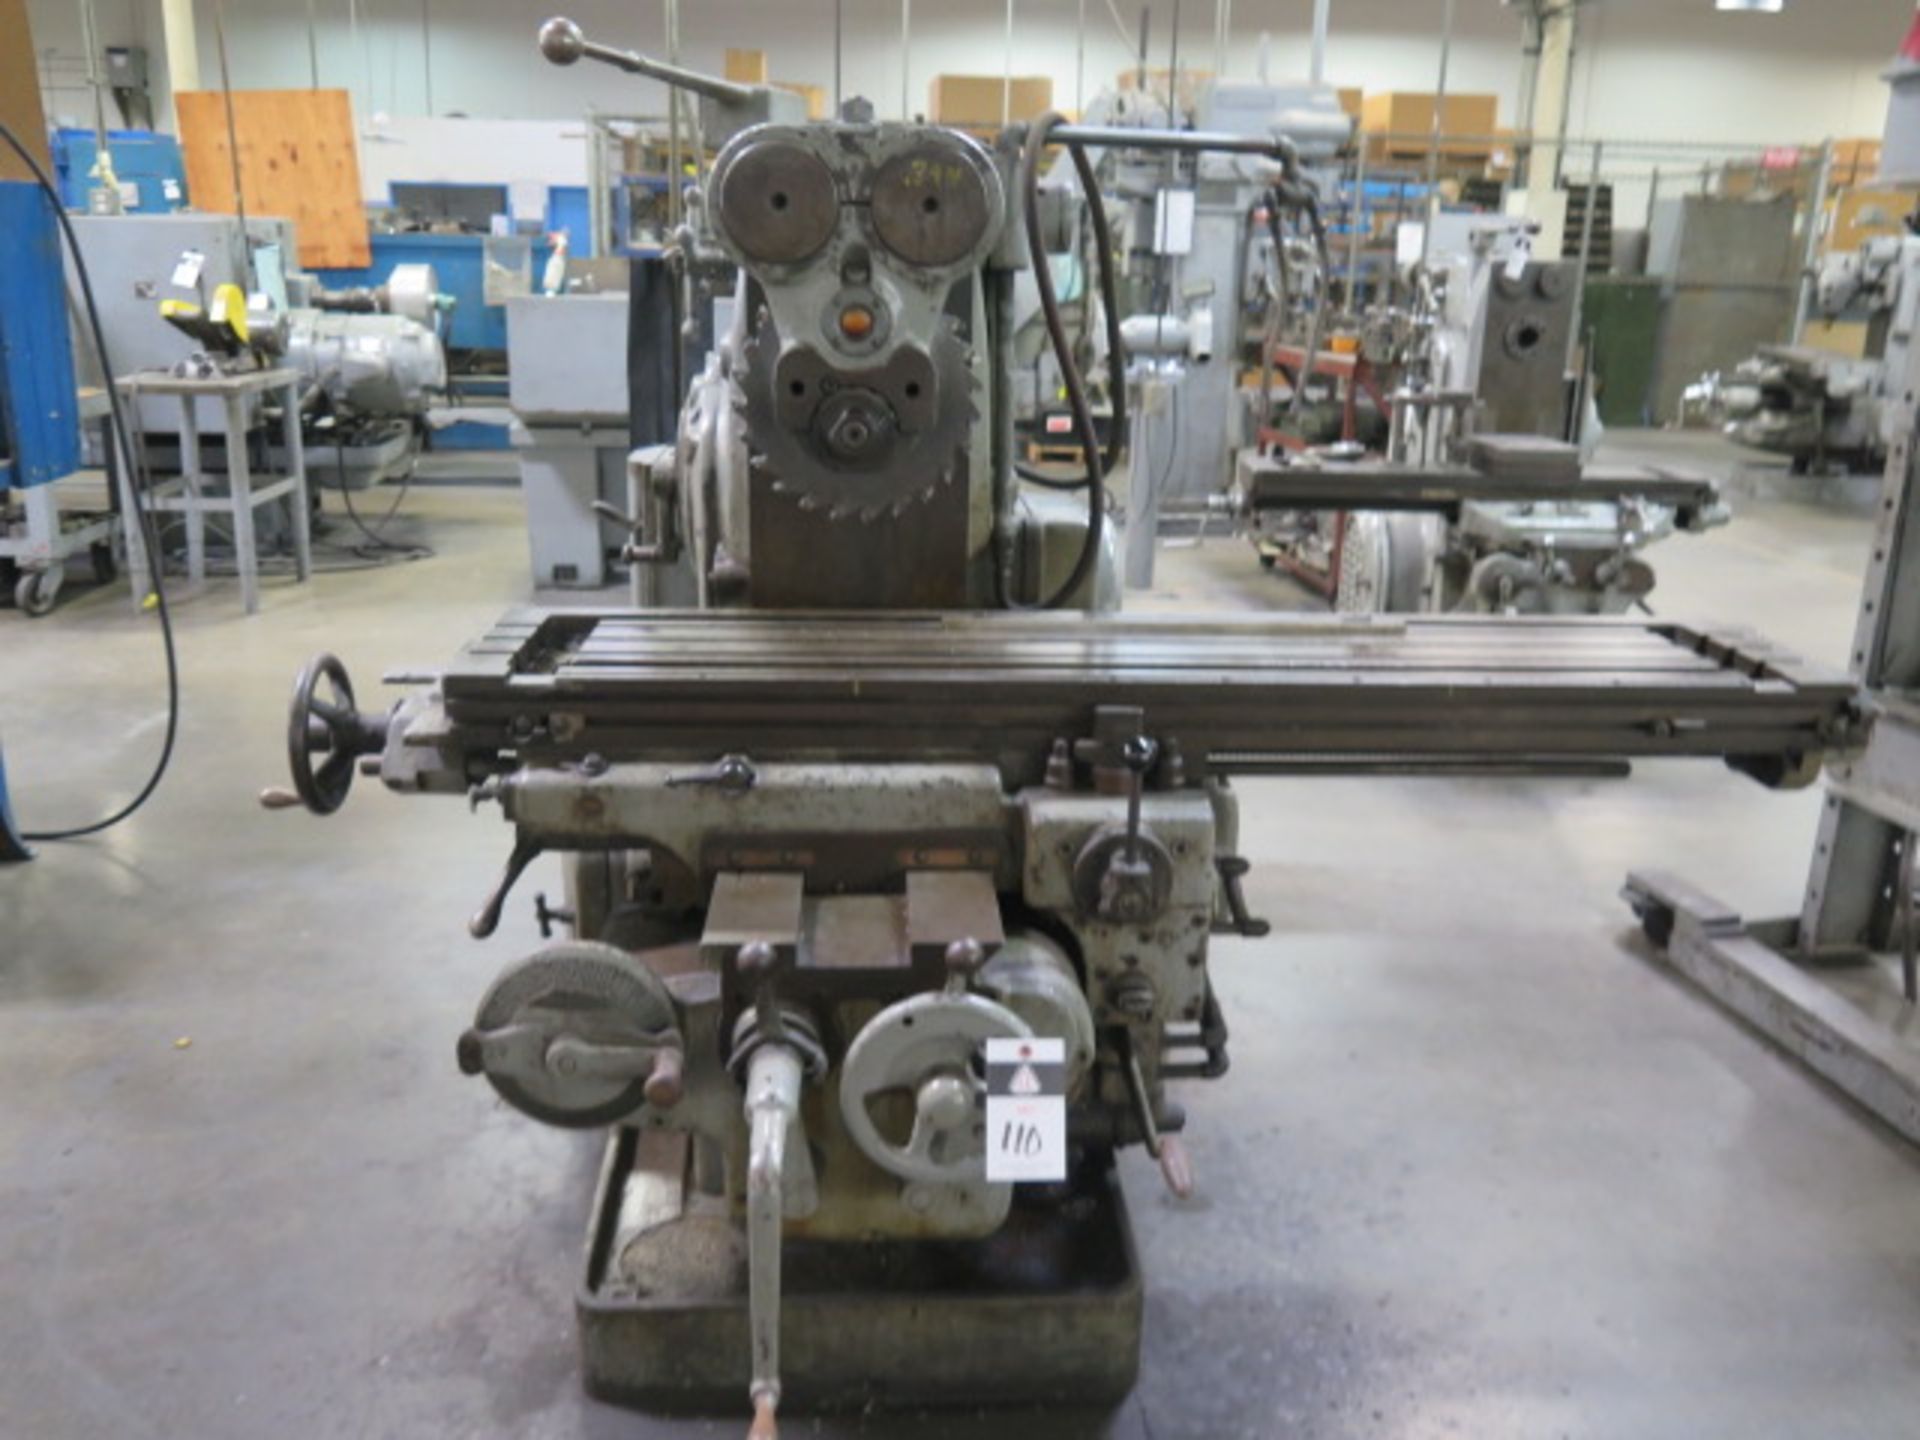 Kearney & Trecker Milwaukee Horizontal Mill s/n 27-7136 w/ 15-1500 RPM, 50-Taper Spindle, SOLD AS IS - Image 2 of 7